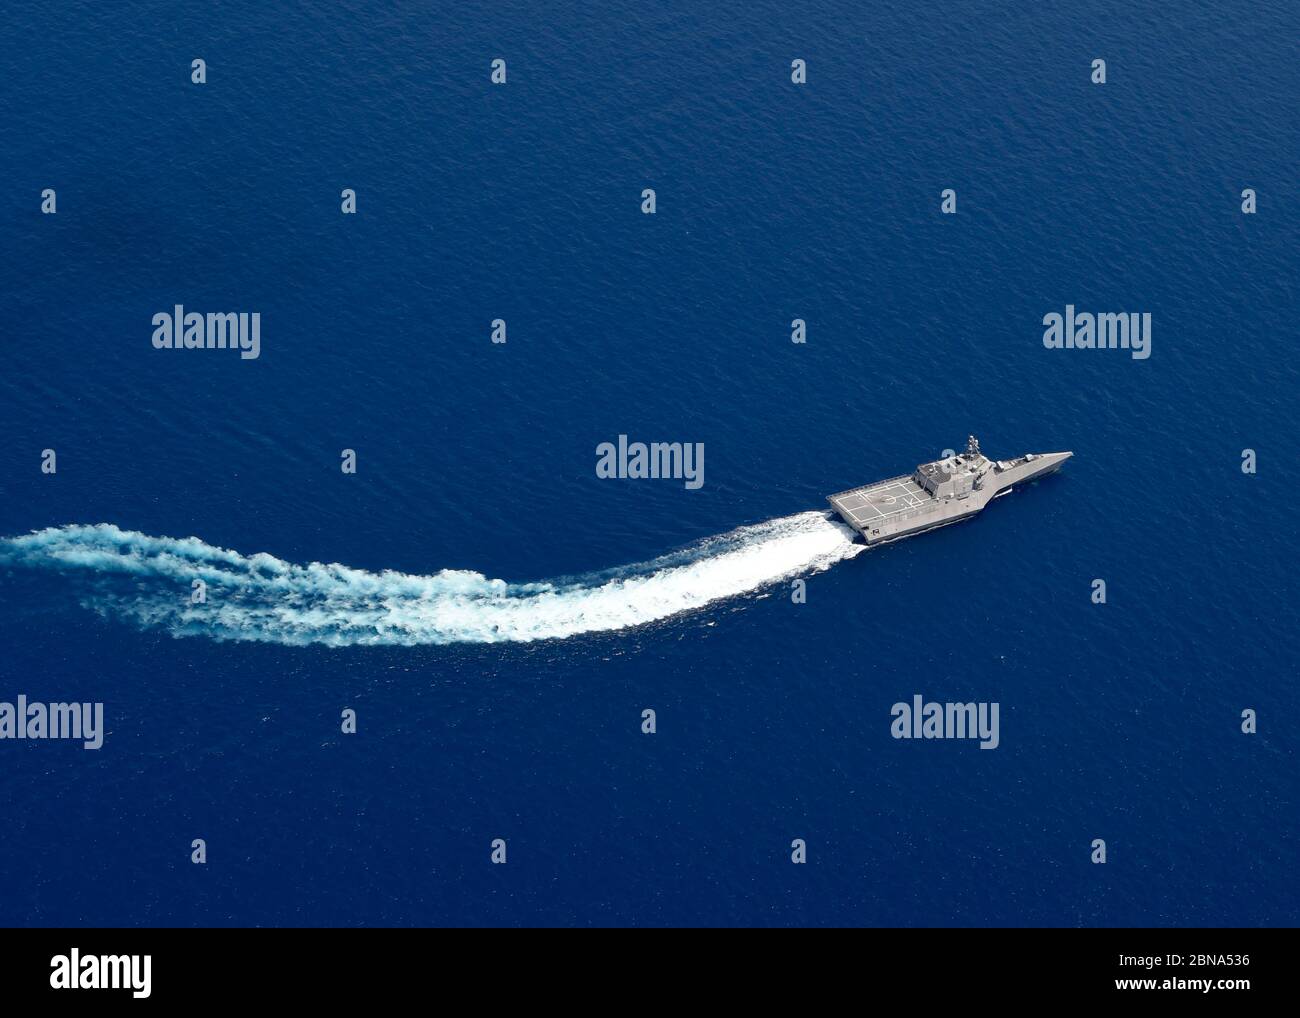 The U.S. Navy Independence-variant littoral combat ship USS Gabrielle Giffords patrols near the Panamanian flagged drill ship, West Capella which has been harassed by Chinese forces for drilling in disputed waters May 12, 2020 in the South China Sea. Stock Photo